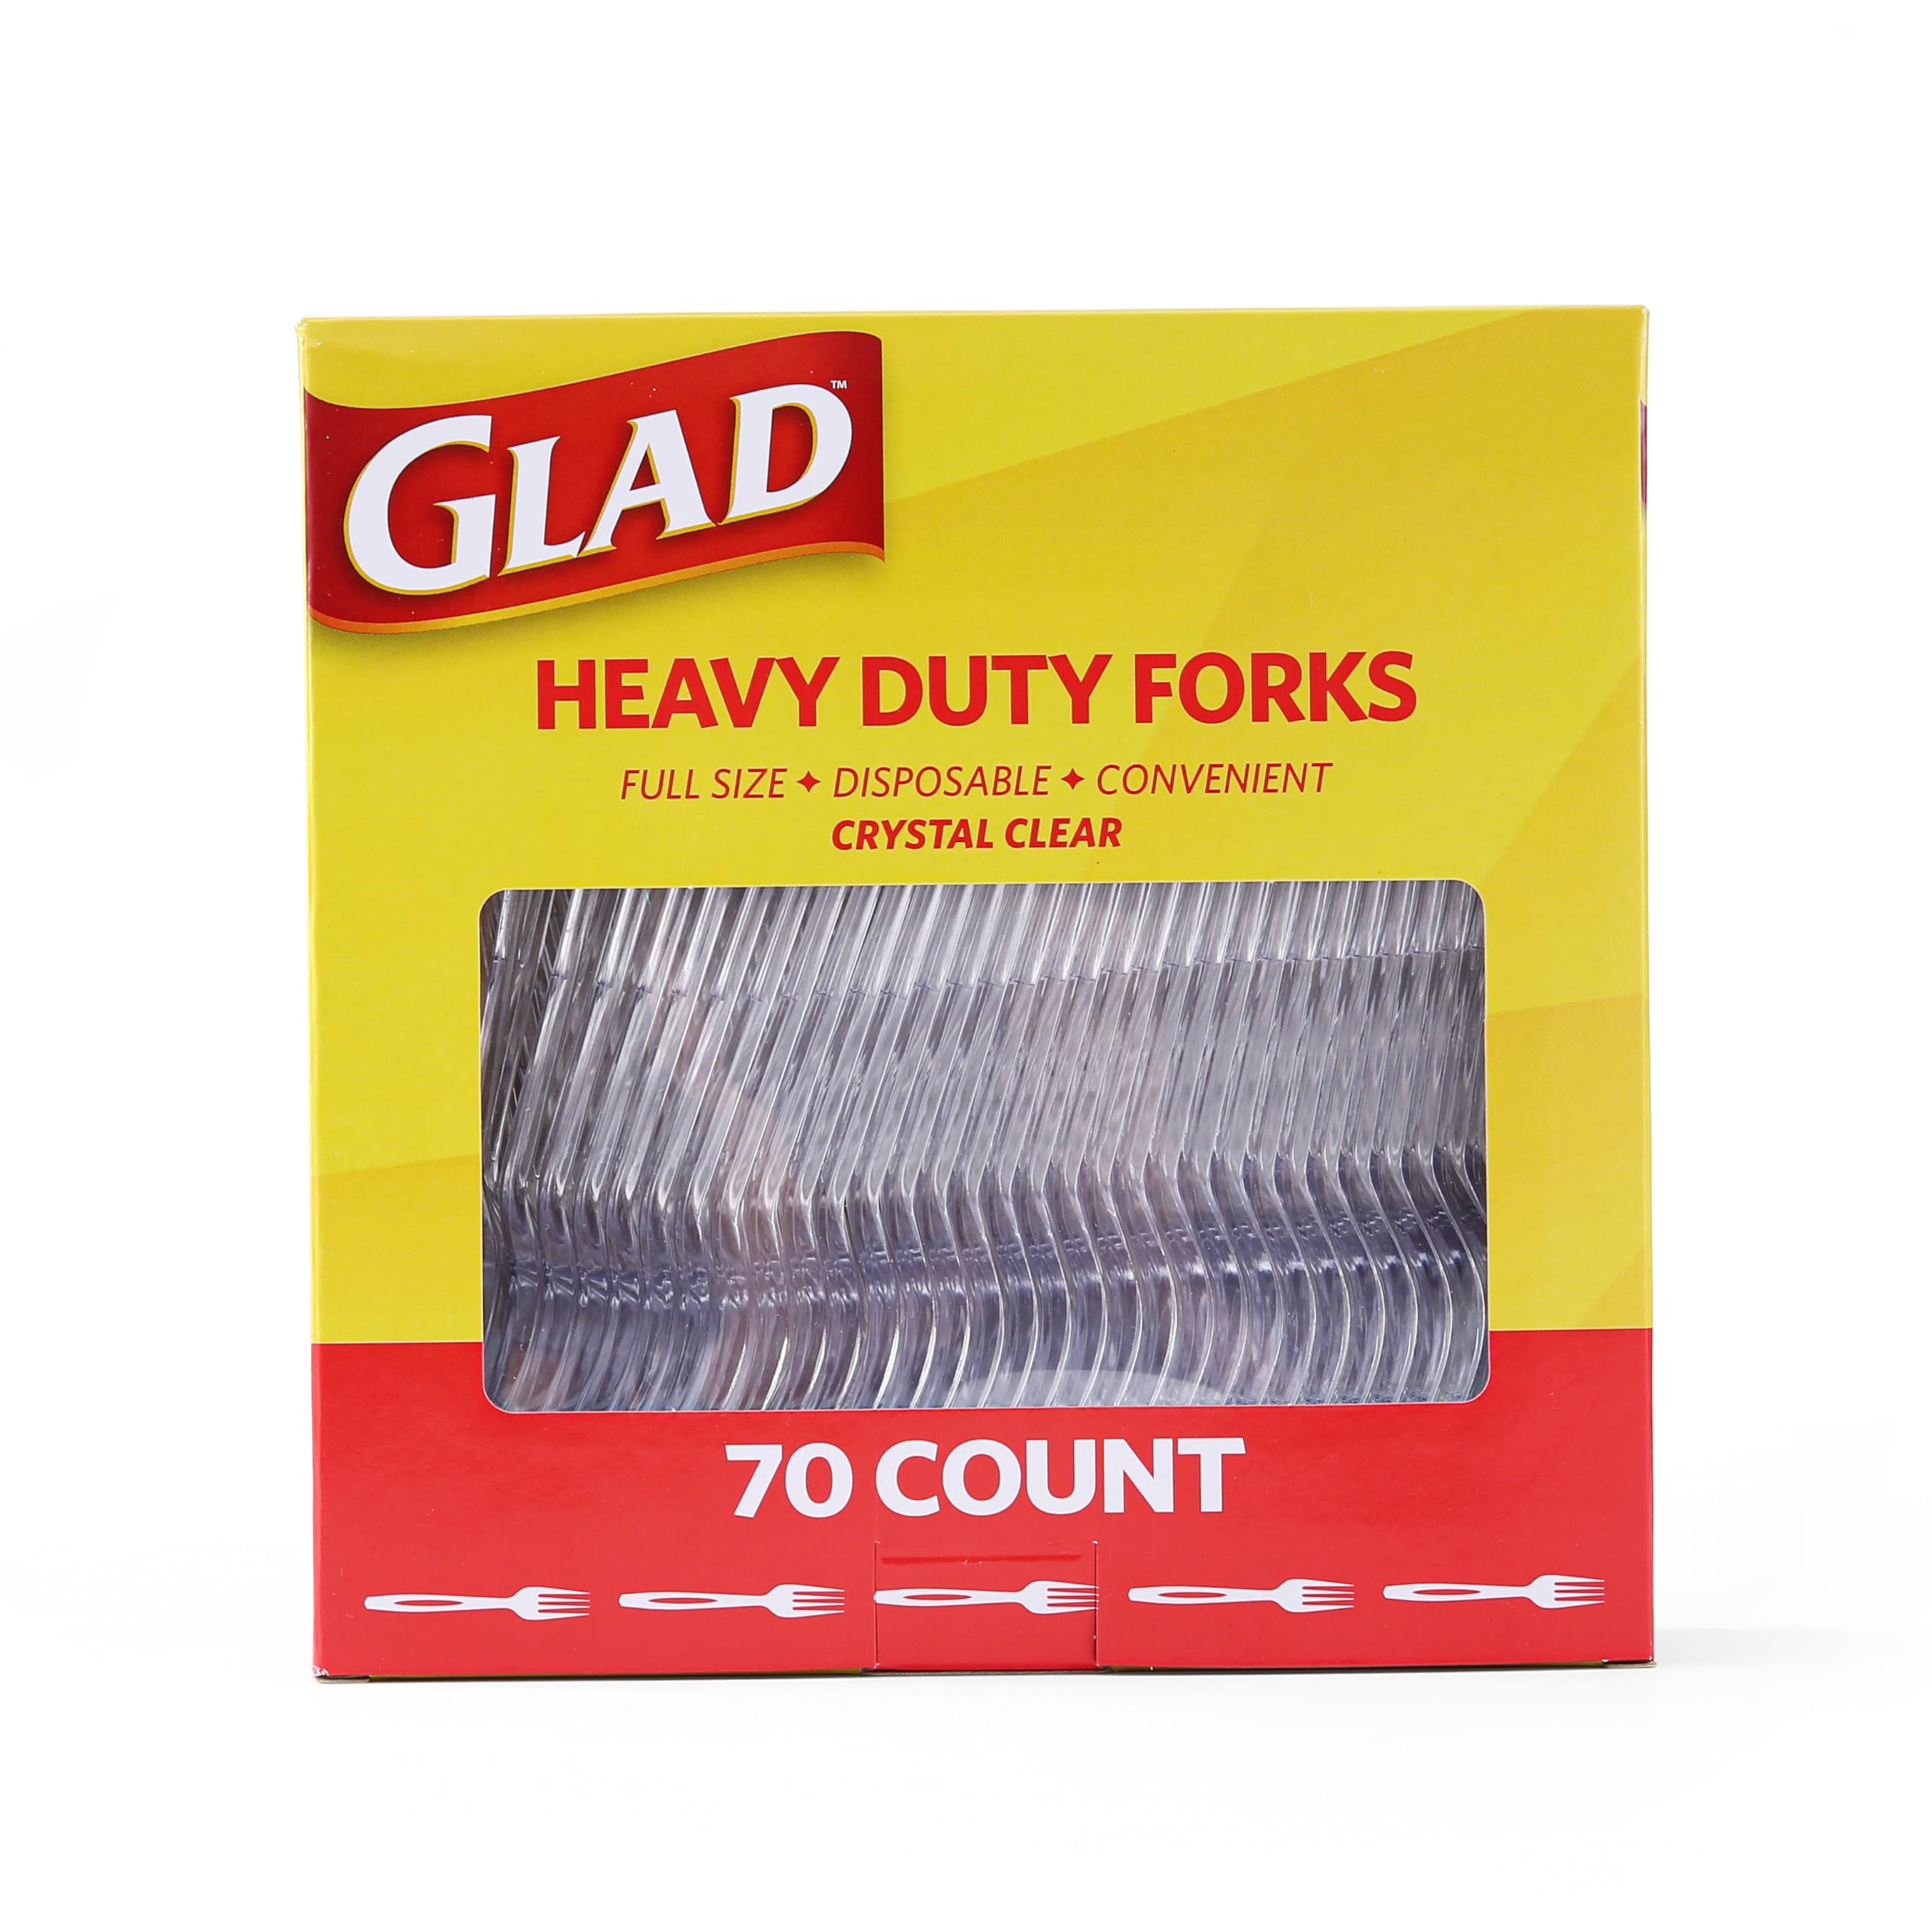 Glad Clear Plastic Forks, Heavy Duty Disposable Cutlery Set, Standard Size, Clear Disposable Fork, Bulk Pack of 70 - Perfect for Parties, Camping, and Everyday Use